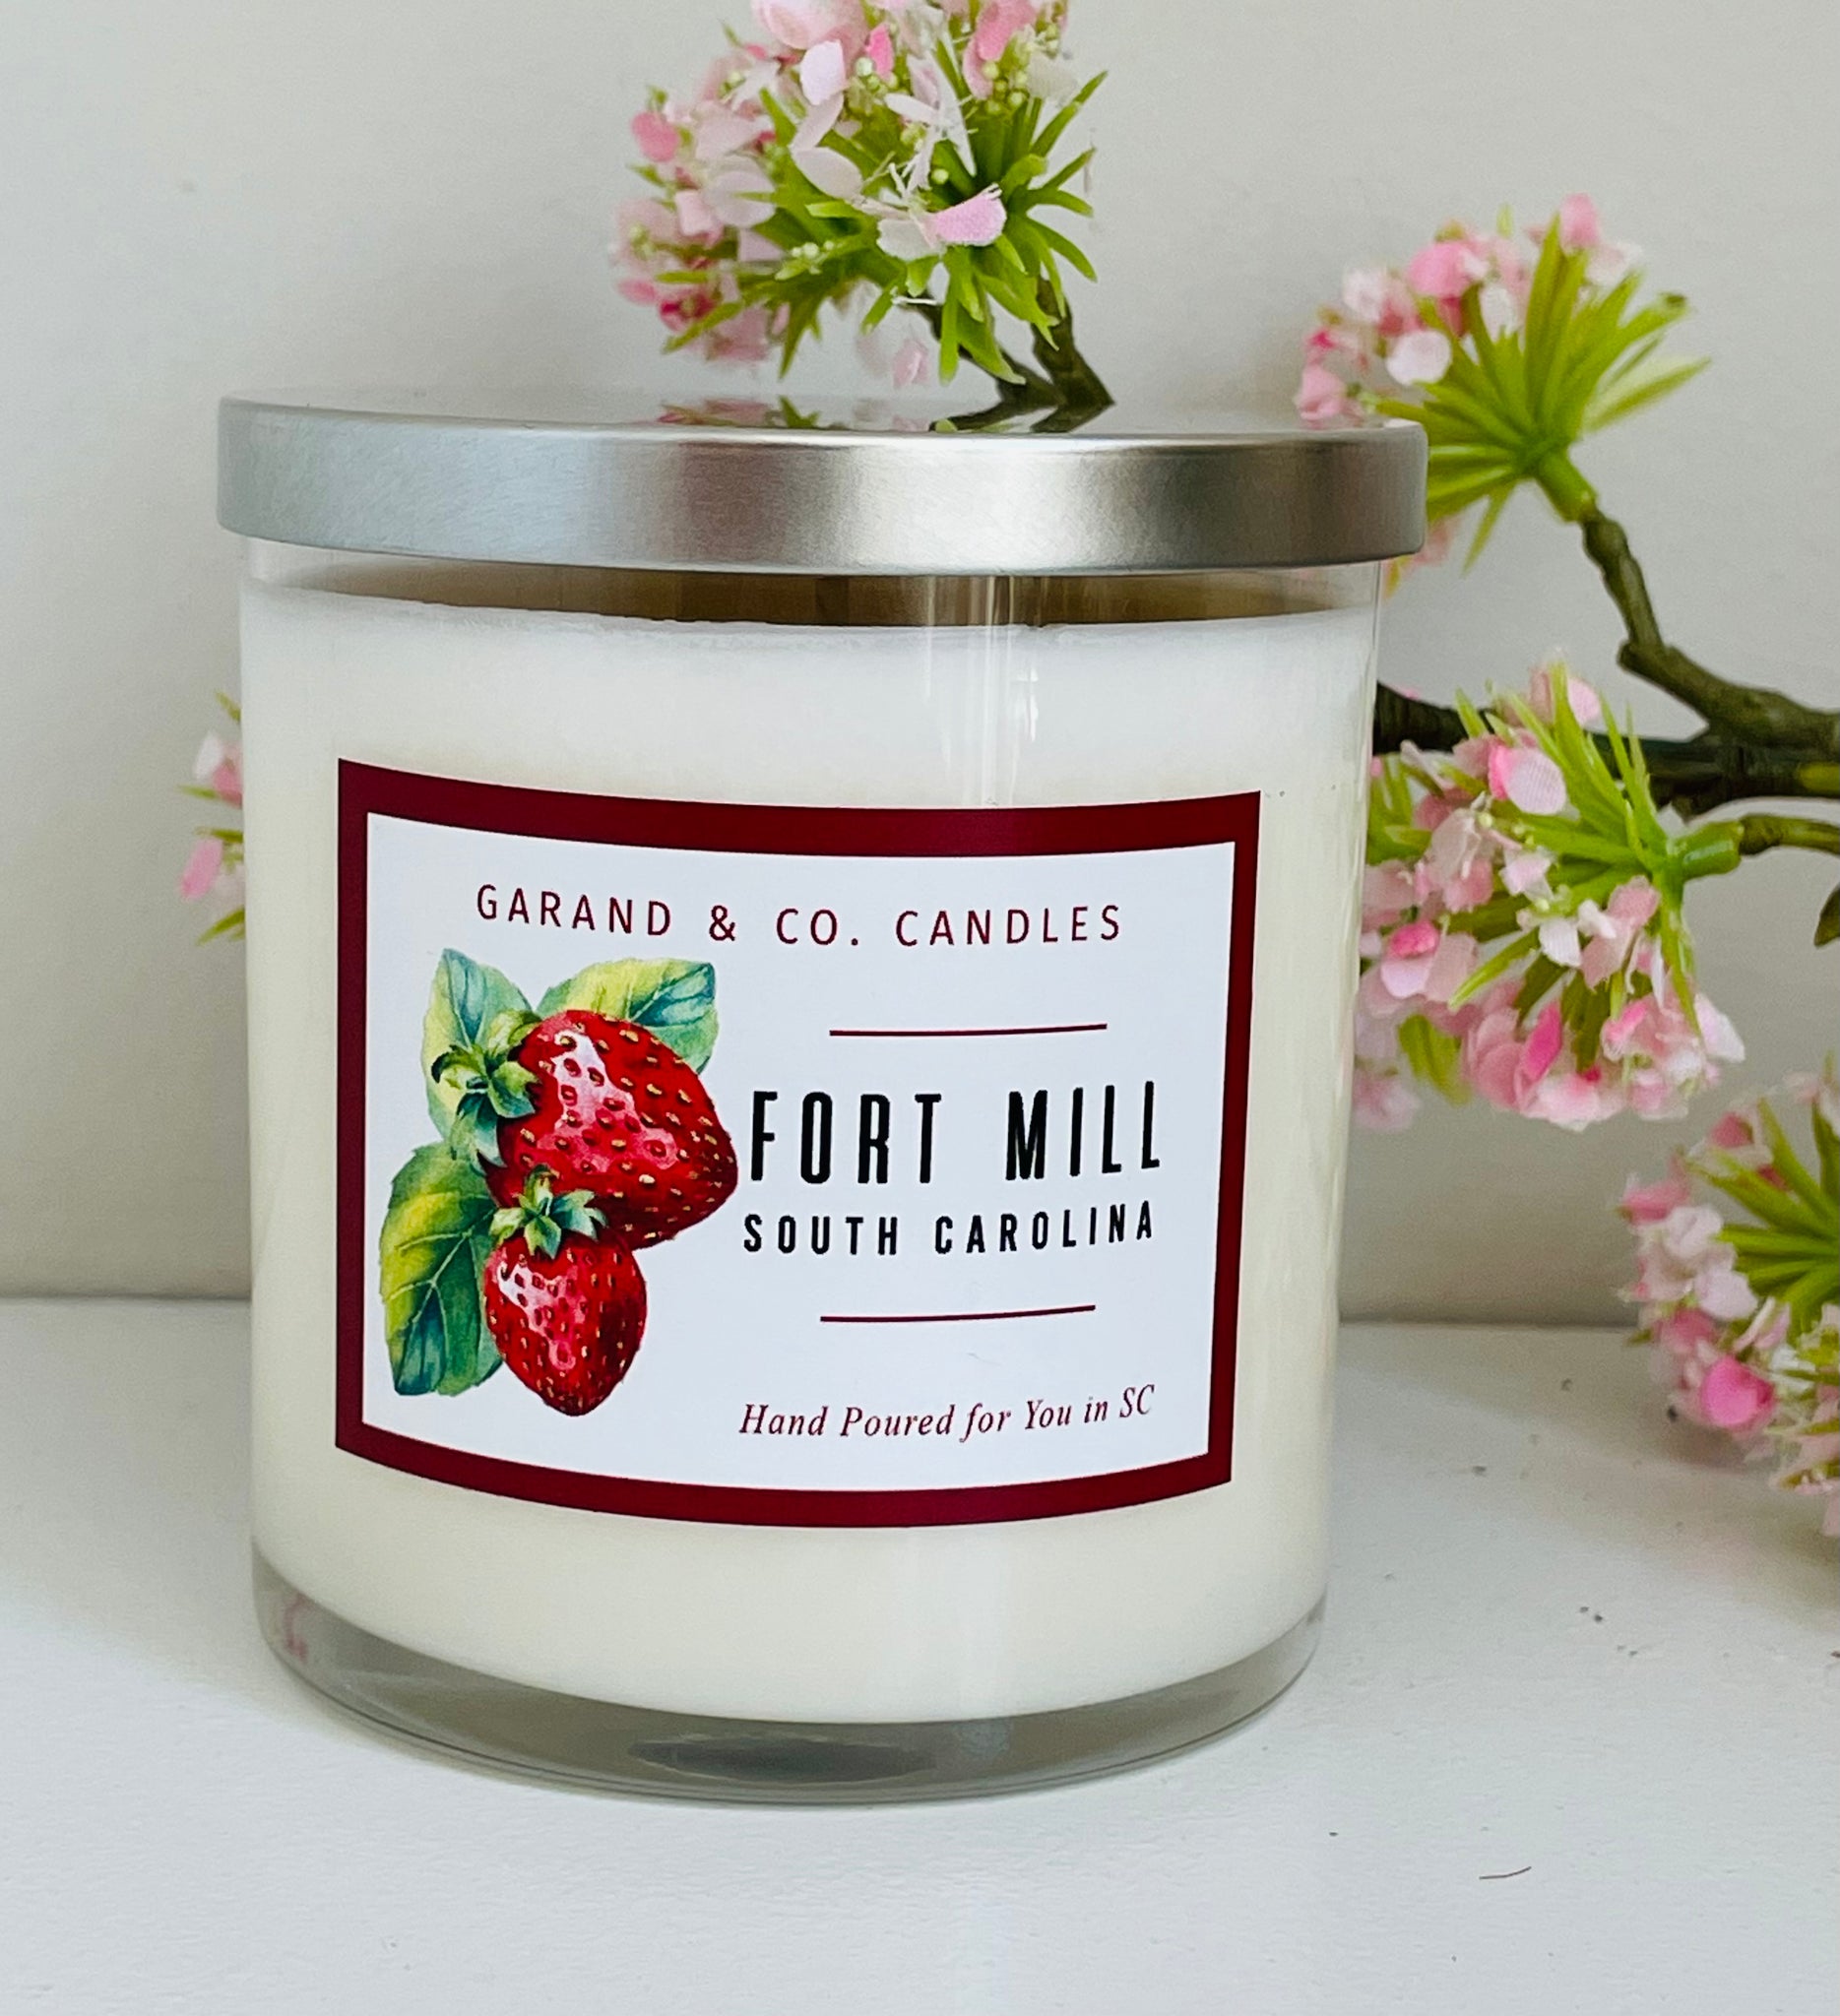 12 oz Clear Glass Jar Candle - Fort Mill, SC Strawberries